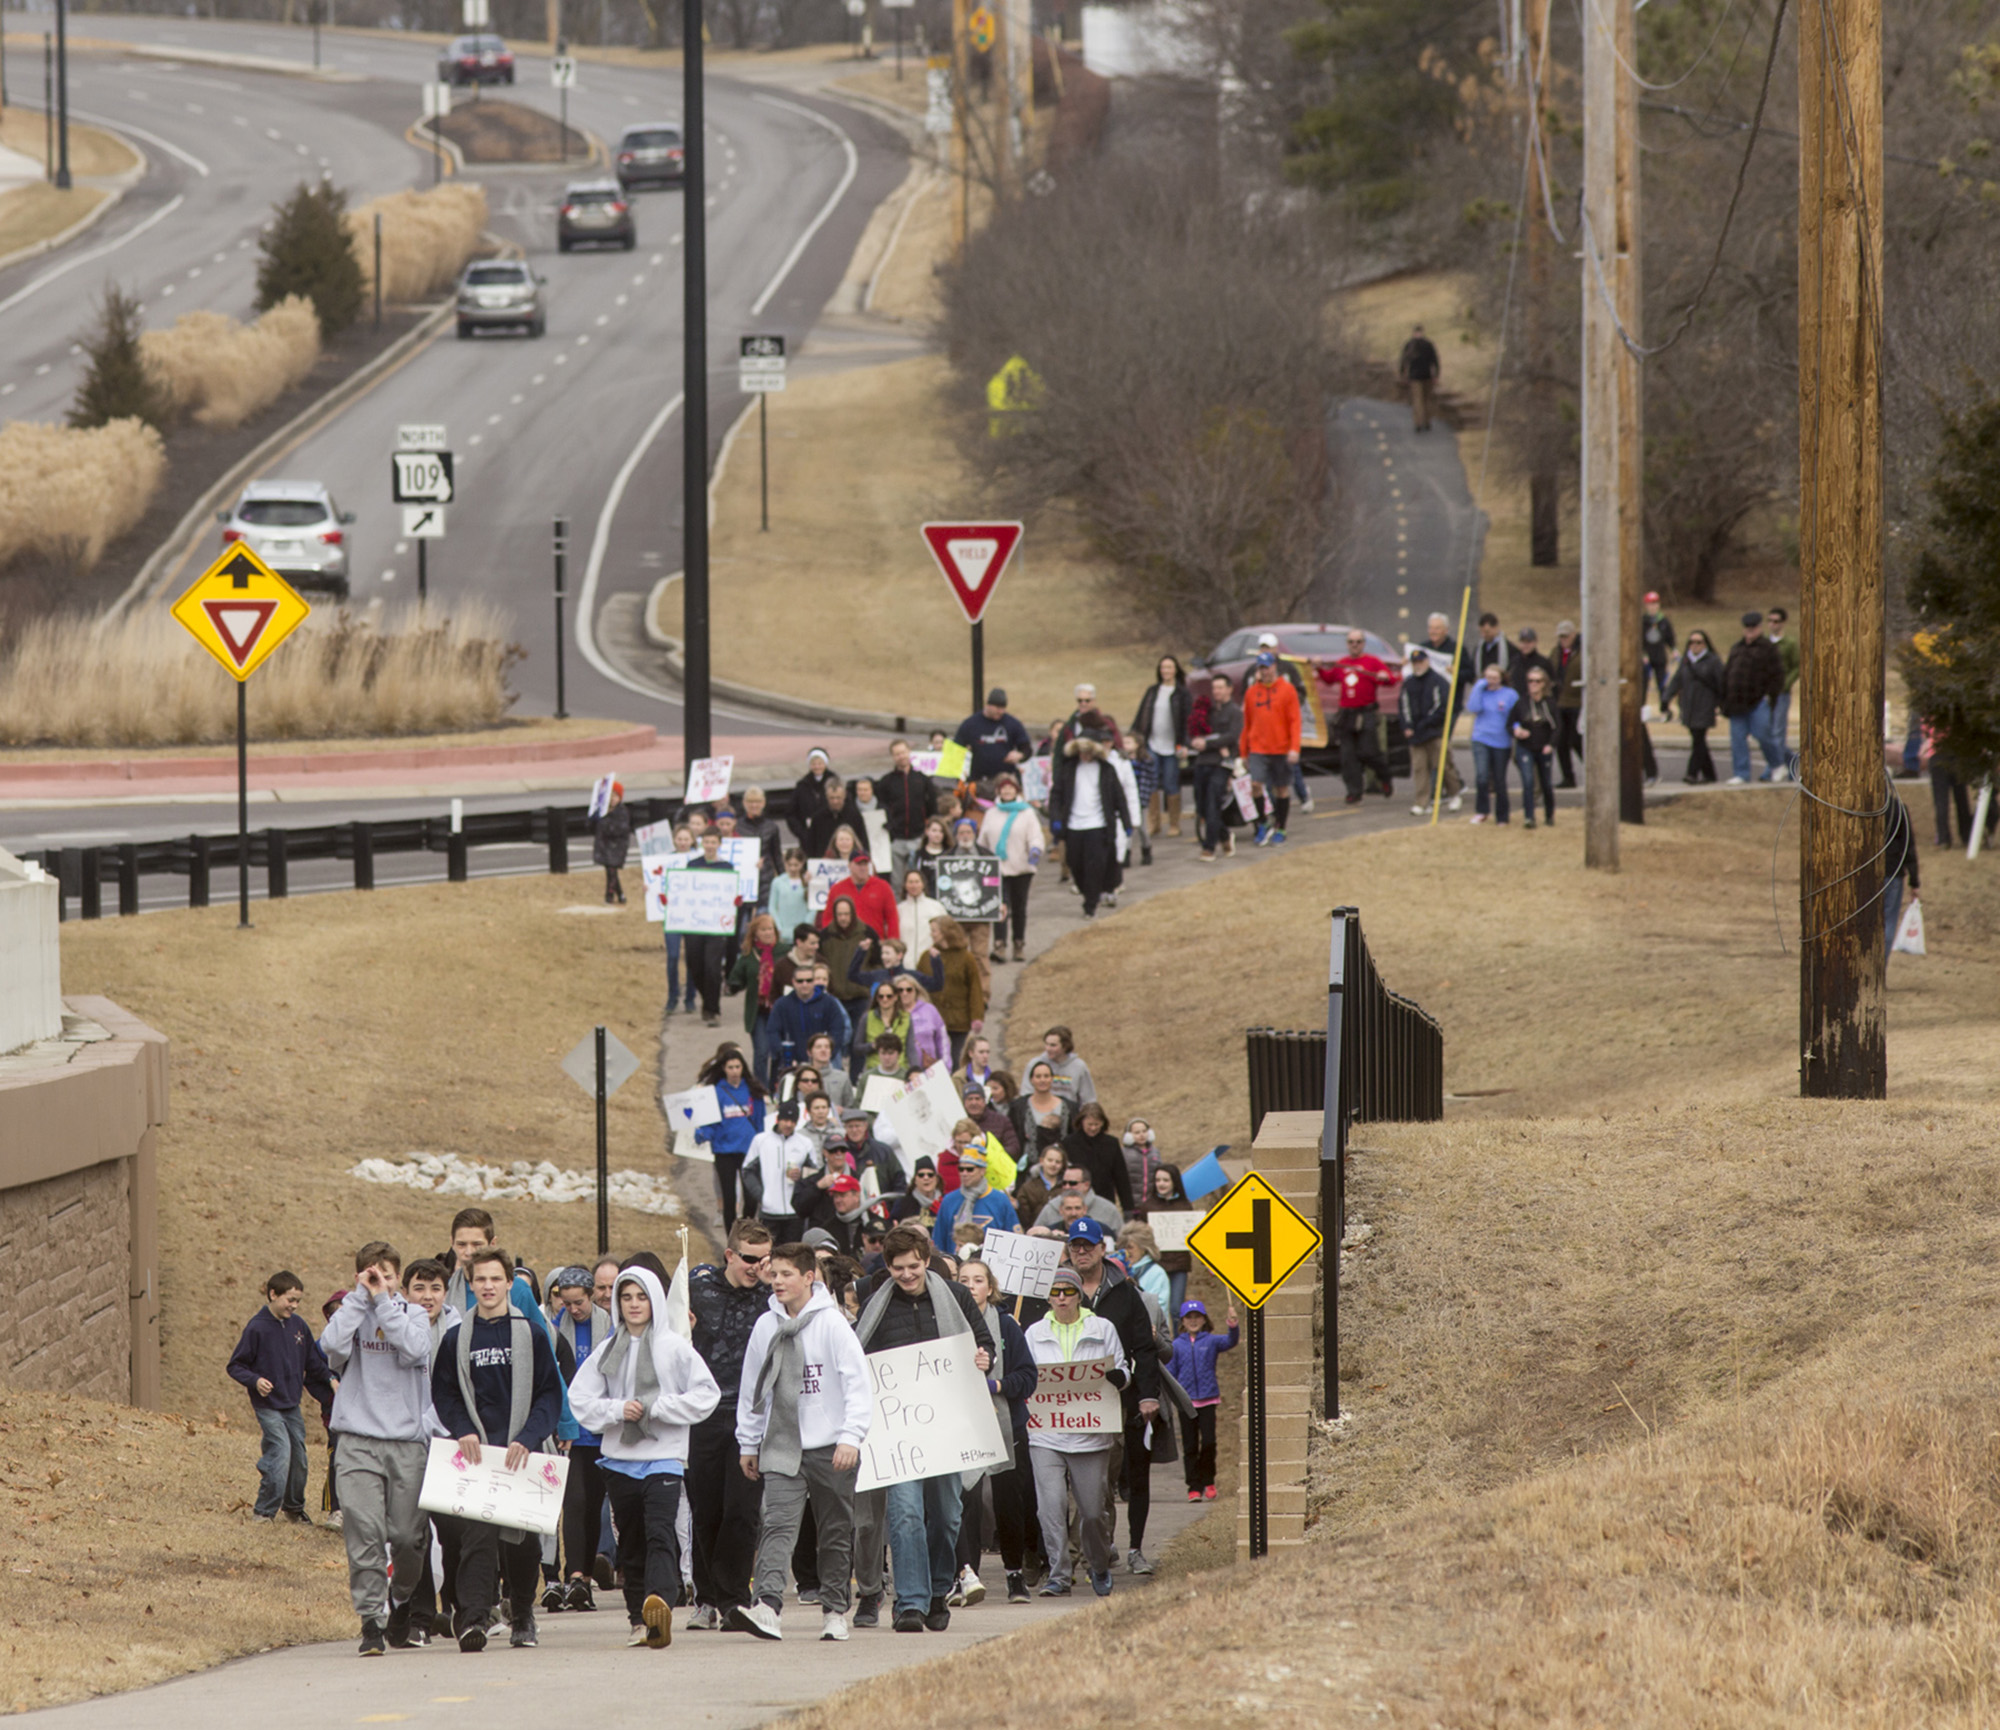 Walkers participated Saturday in a march for life and rally hosted by the middle school ministry at St. Alban Roe School. The crowd marched from the school down Missouri Route 109 to Wildwood City Hall for a rally that included an address from Mayor Jim Bowlin.